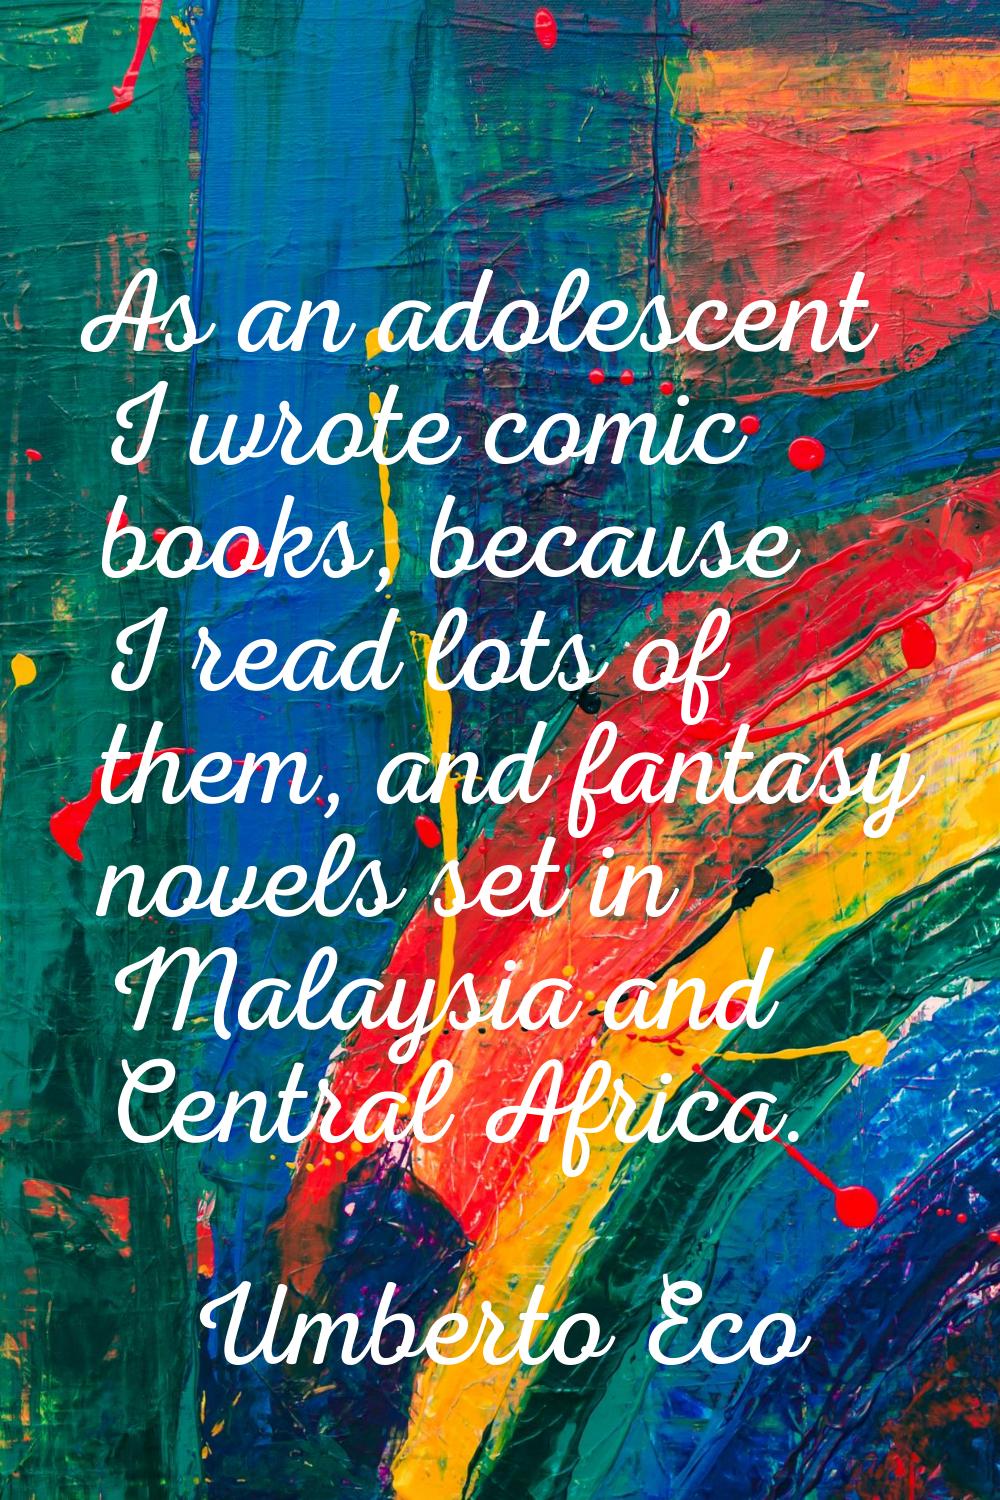 As an adolescent I wrote comic books, because I read lots of them, and fantasy novels set in Malays